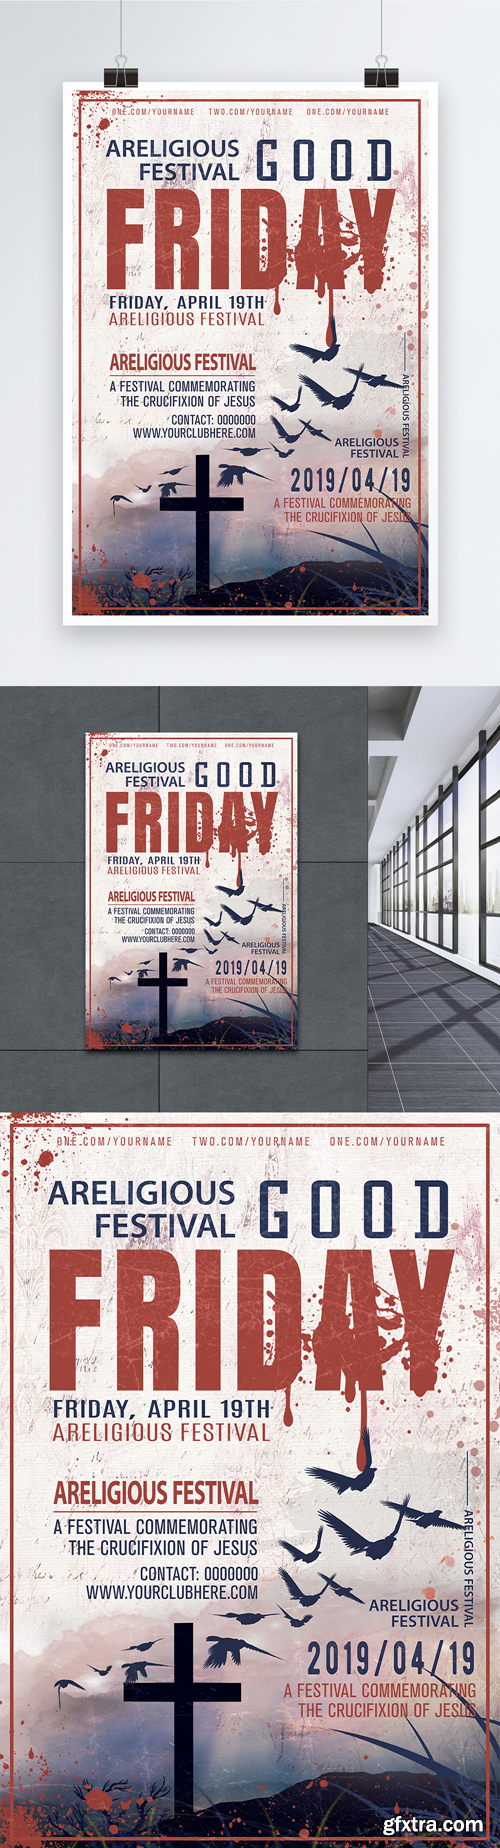 good friday posters